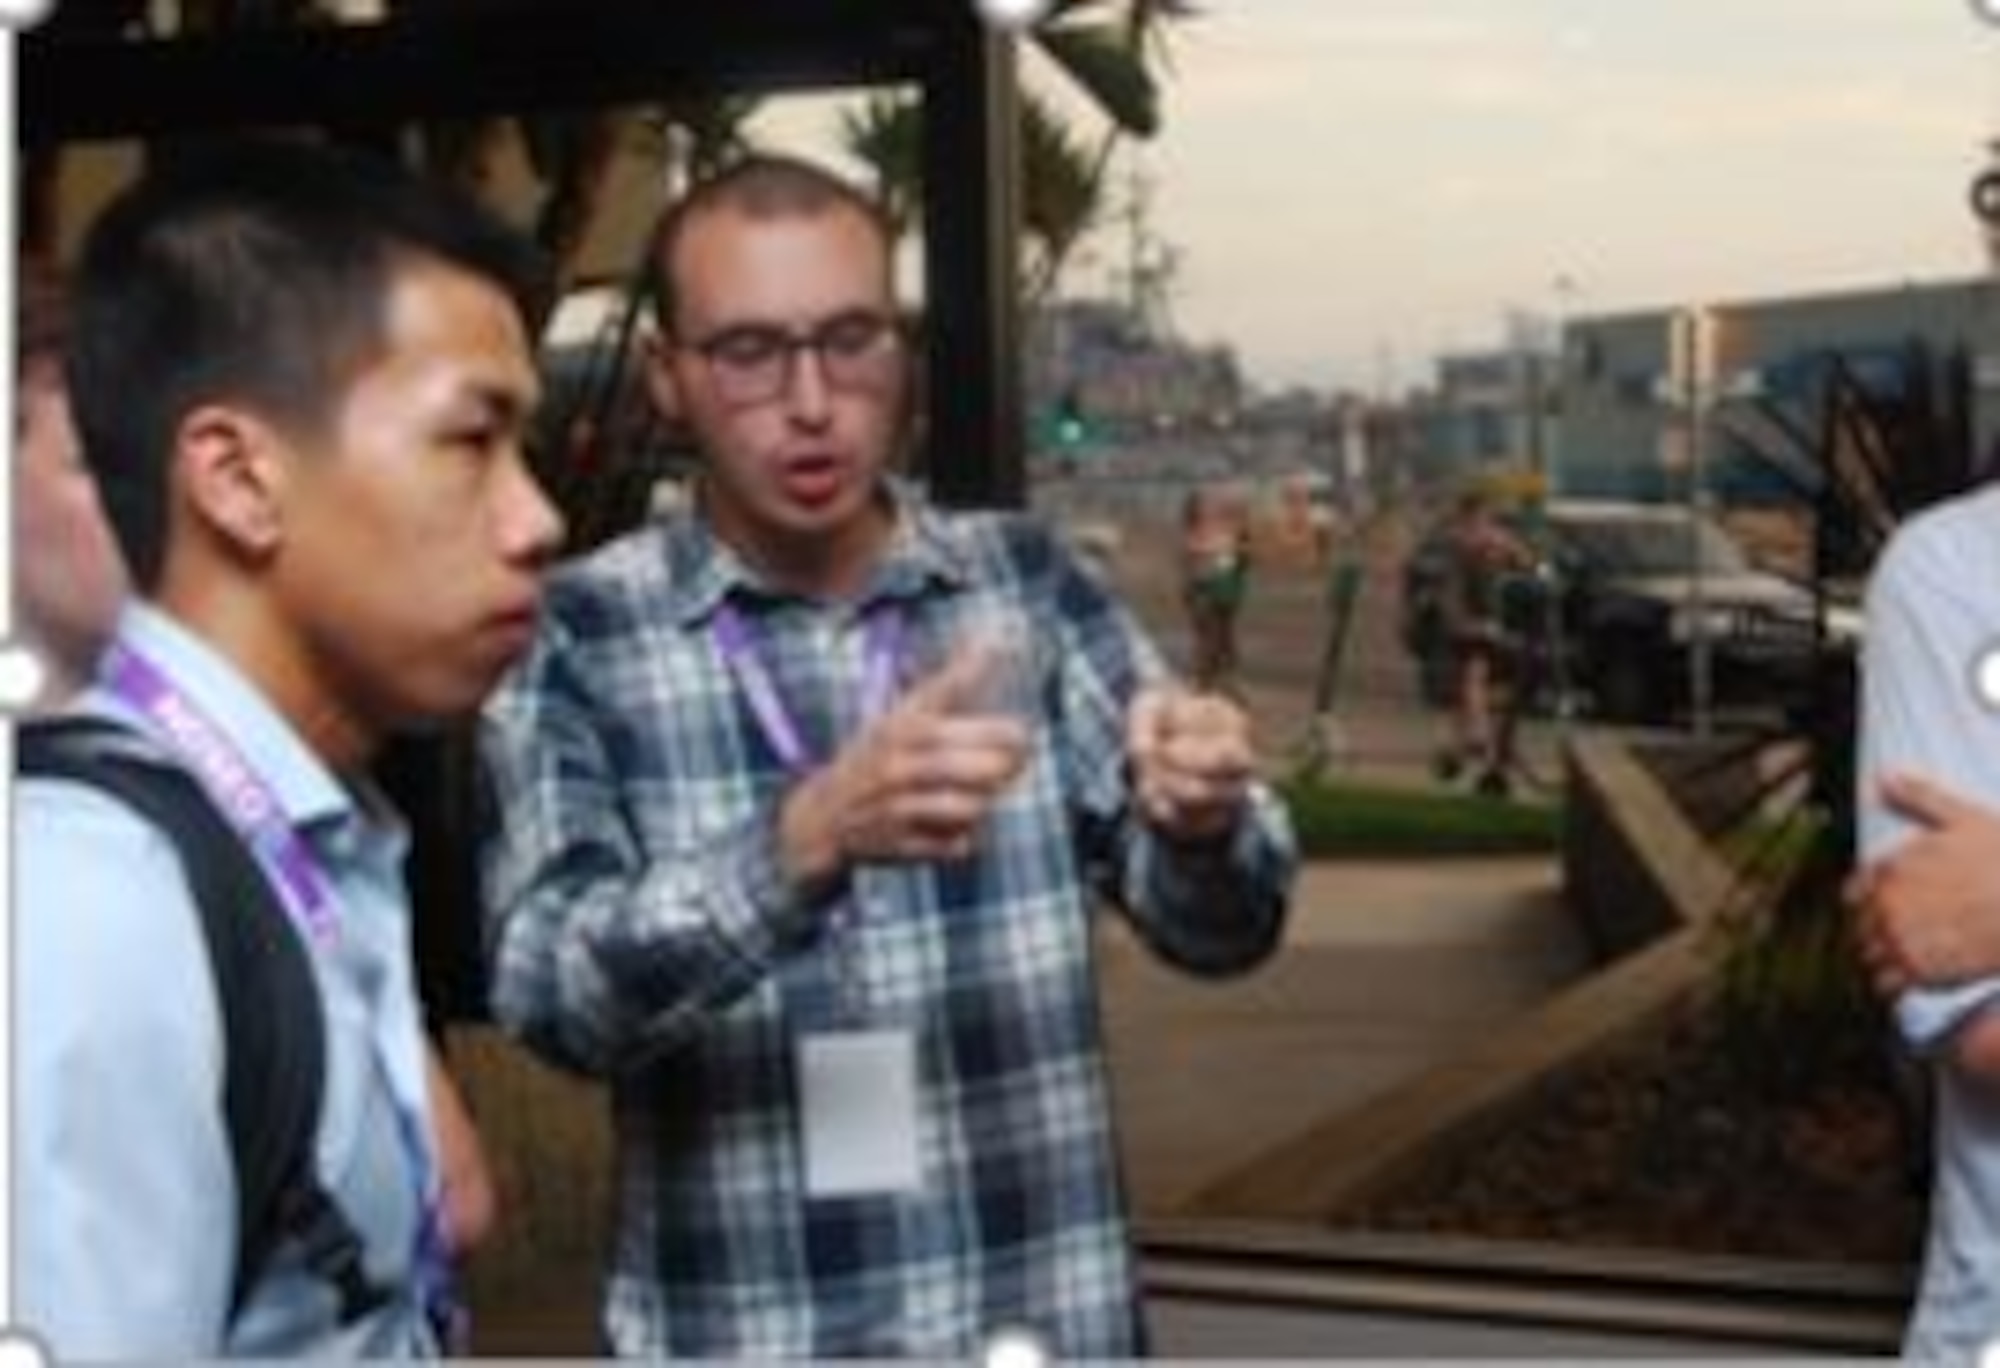 Fellows from 15 areas of DOD interest gathered in San Diego, California in the first week of August for the National Defense Science and Engineering Graduate Fellowship Program. (U.S. Air Force photo/Brianna Hodges)